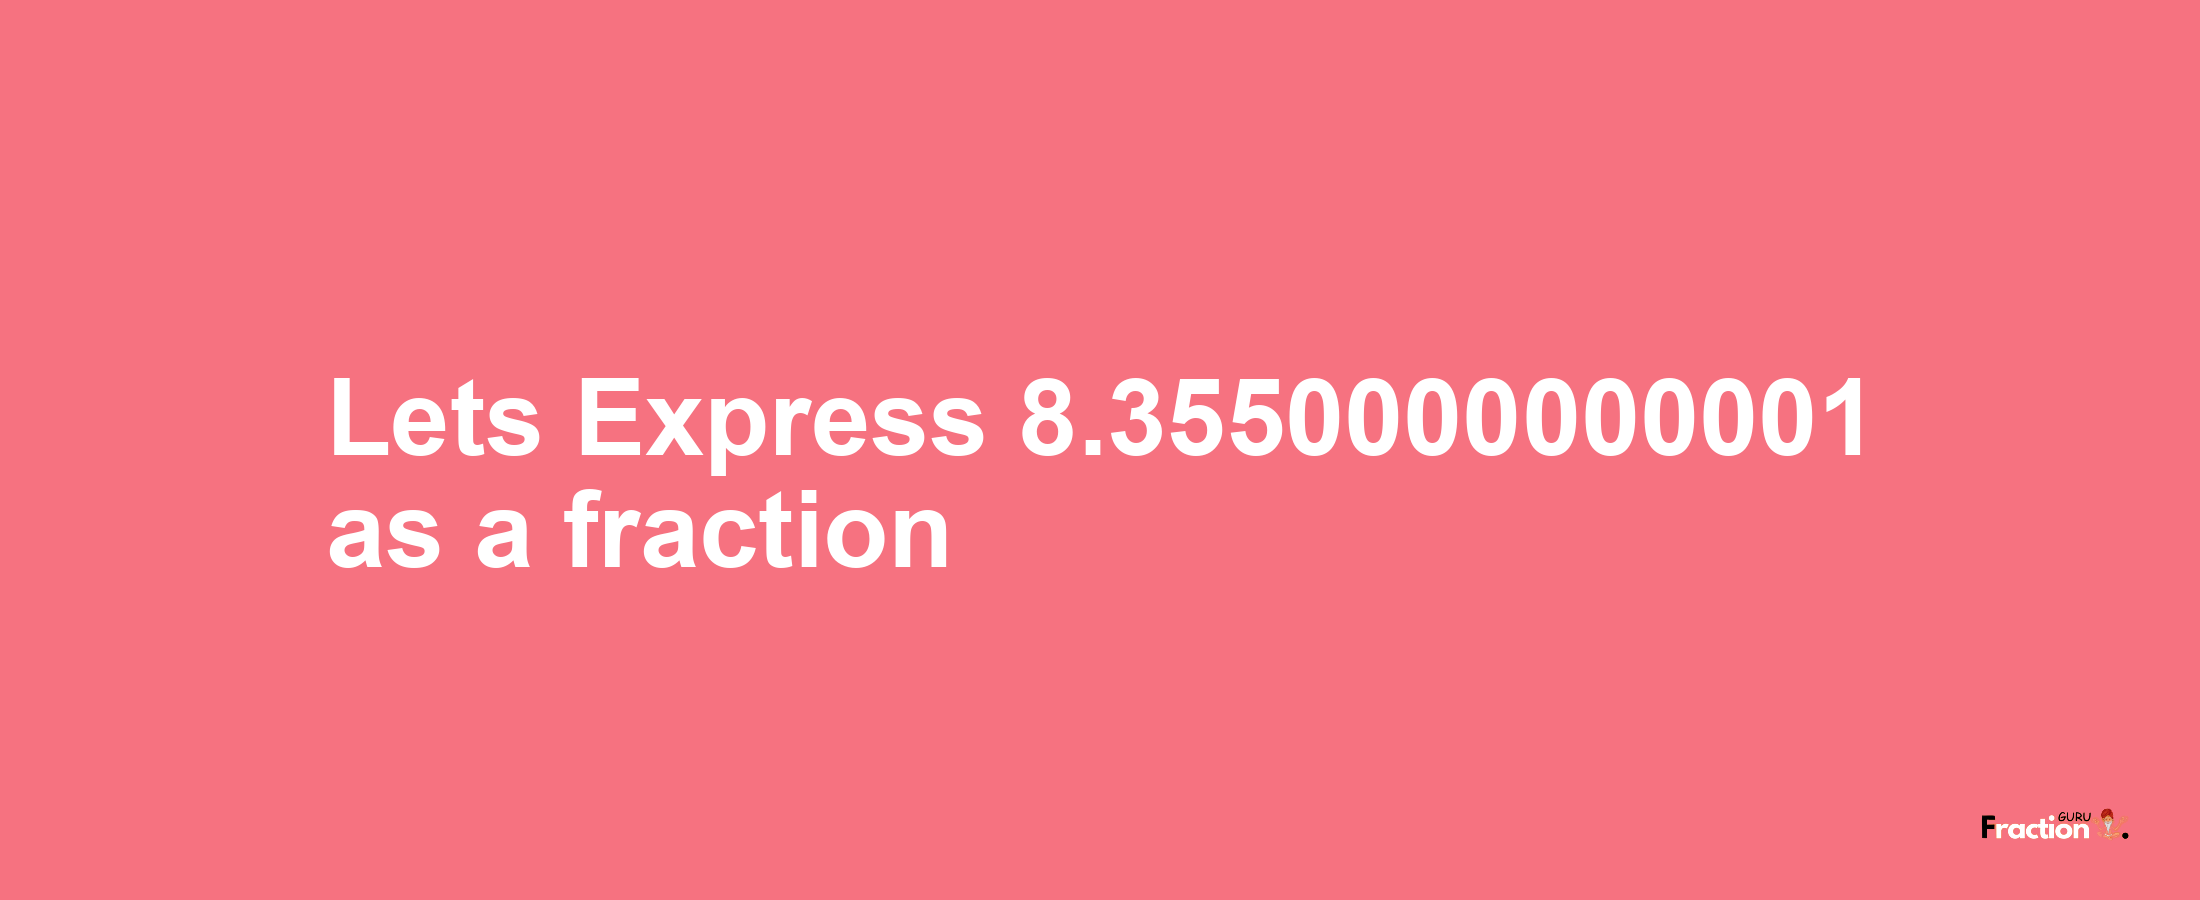 Lets Express 8.3550000000001 as afraction